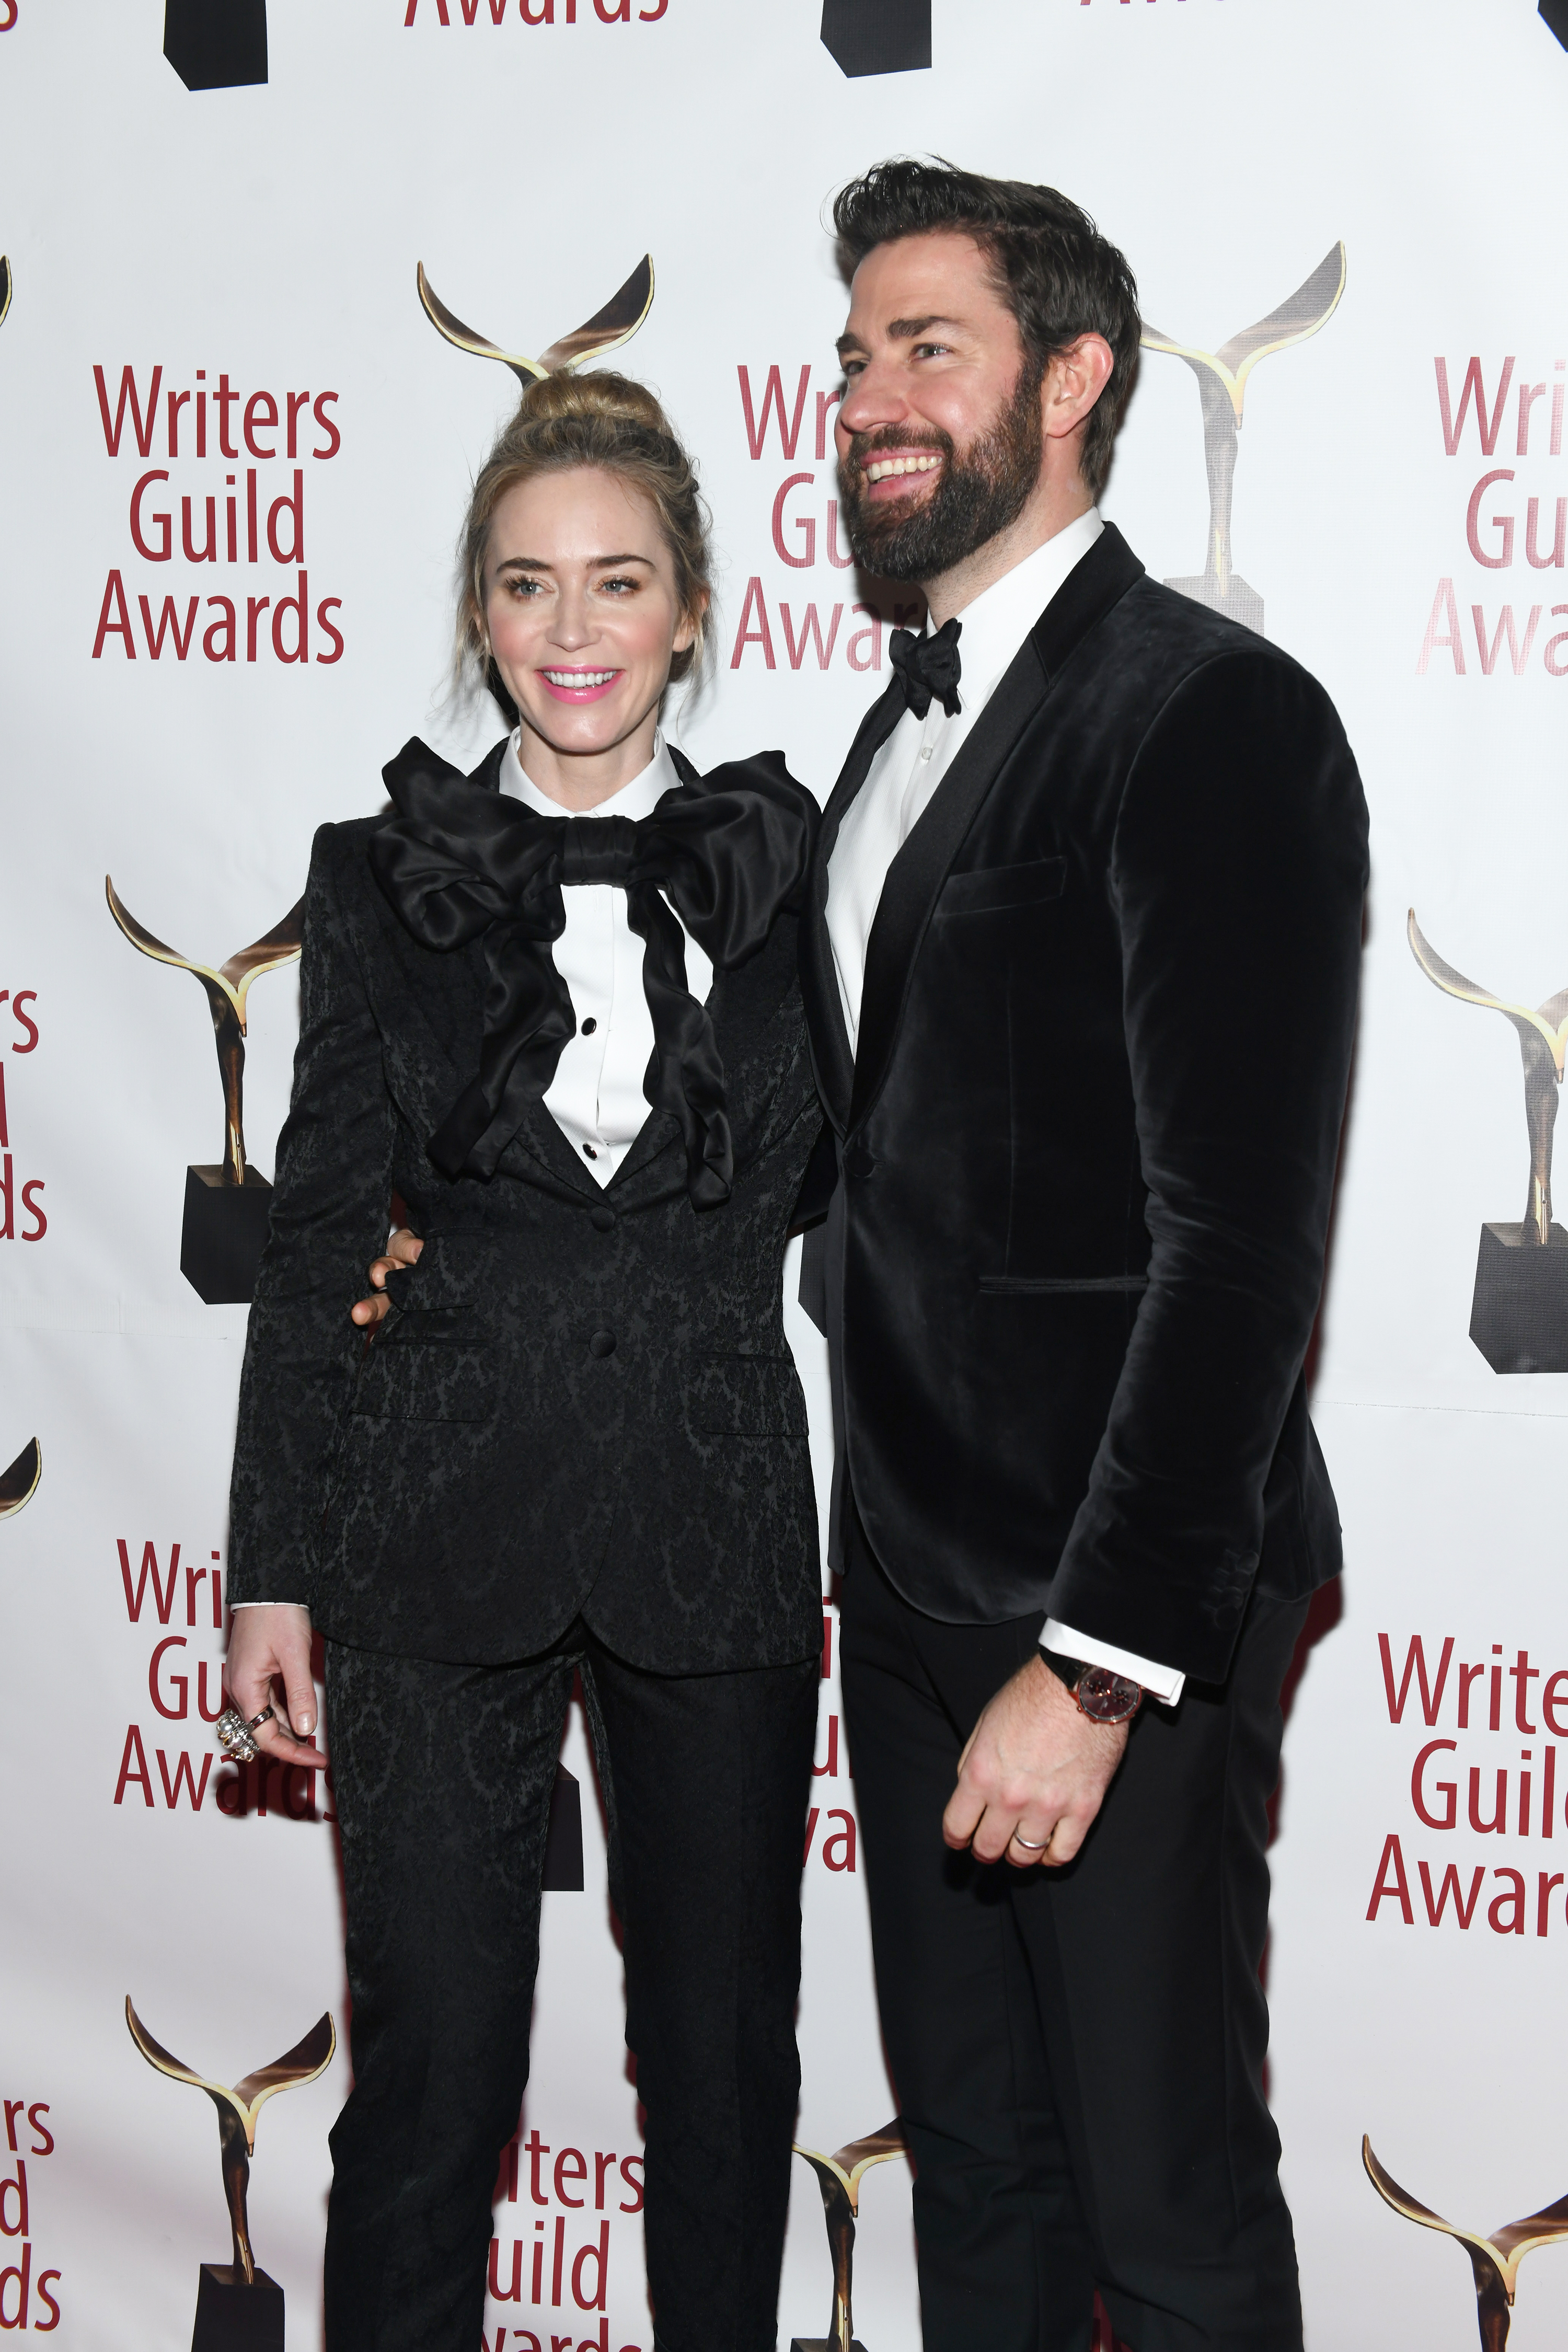 Emily Blunt and John Krasinski attend the 71st Annual Writers Guild Awards New York Ceremony at Edison Ballroom in New York City, on February 17, 2019. | Source: Getty Images